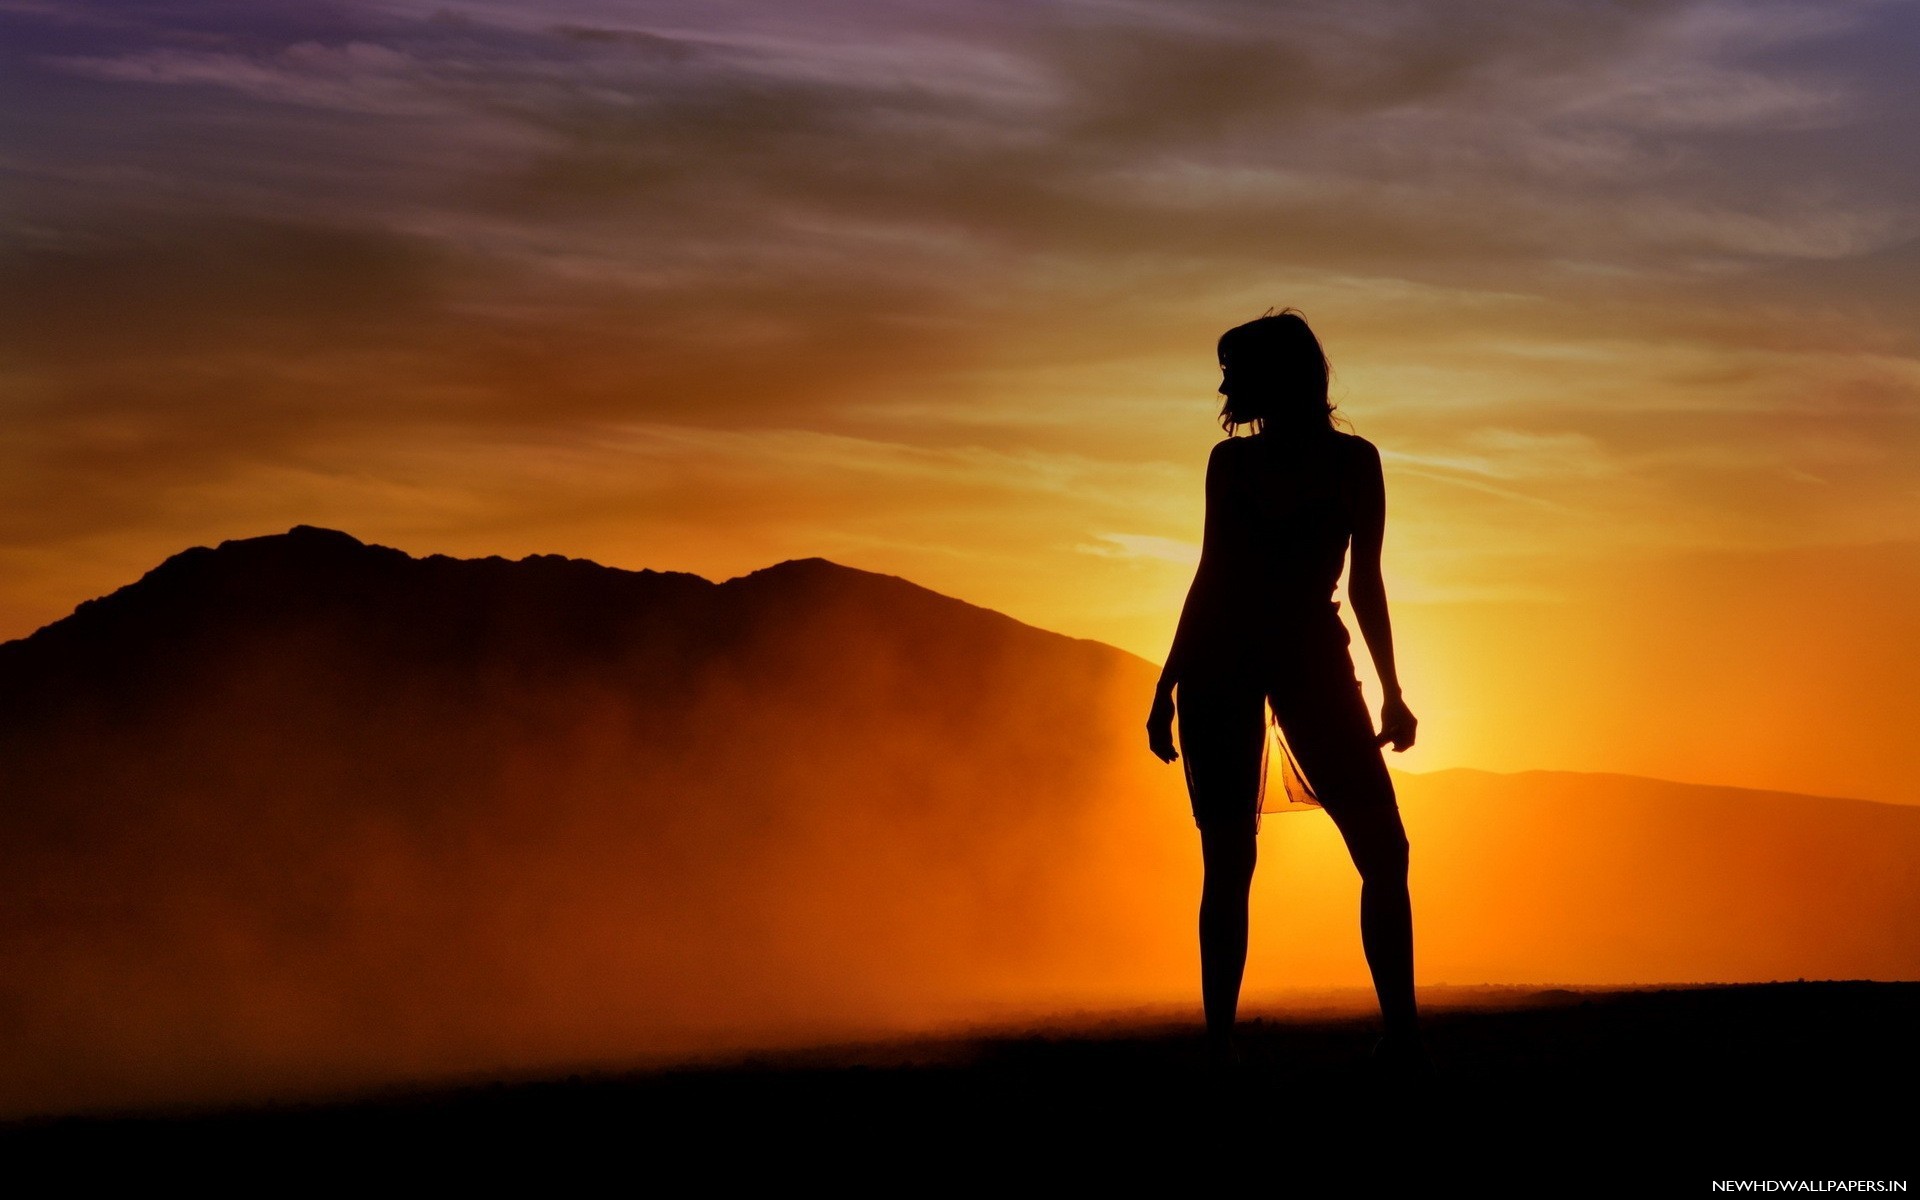 Sunset Silhouette Girl Background Wallpaper   New HD Wallpapers